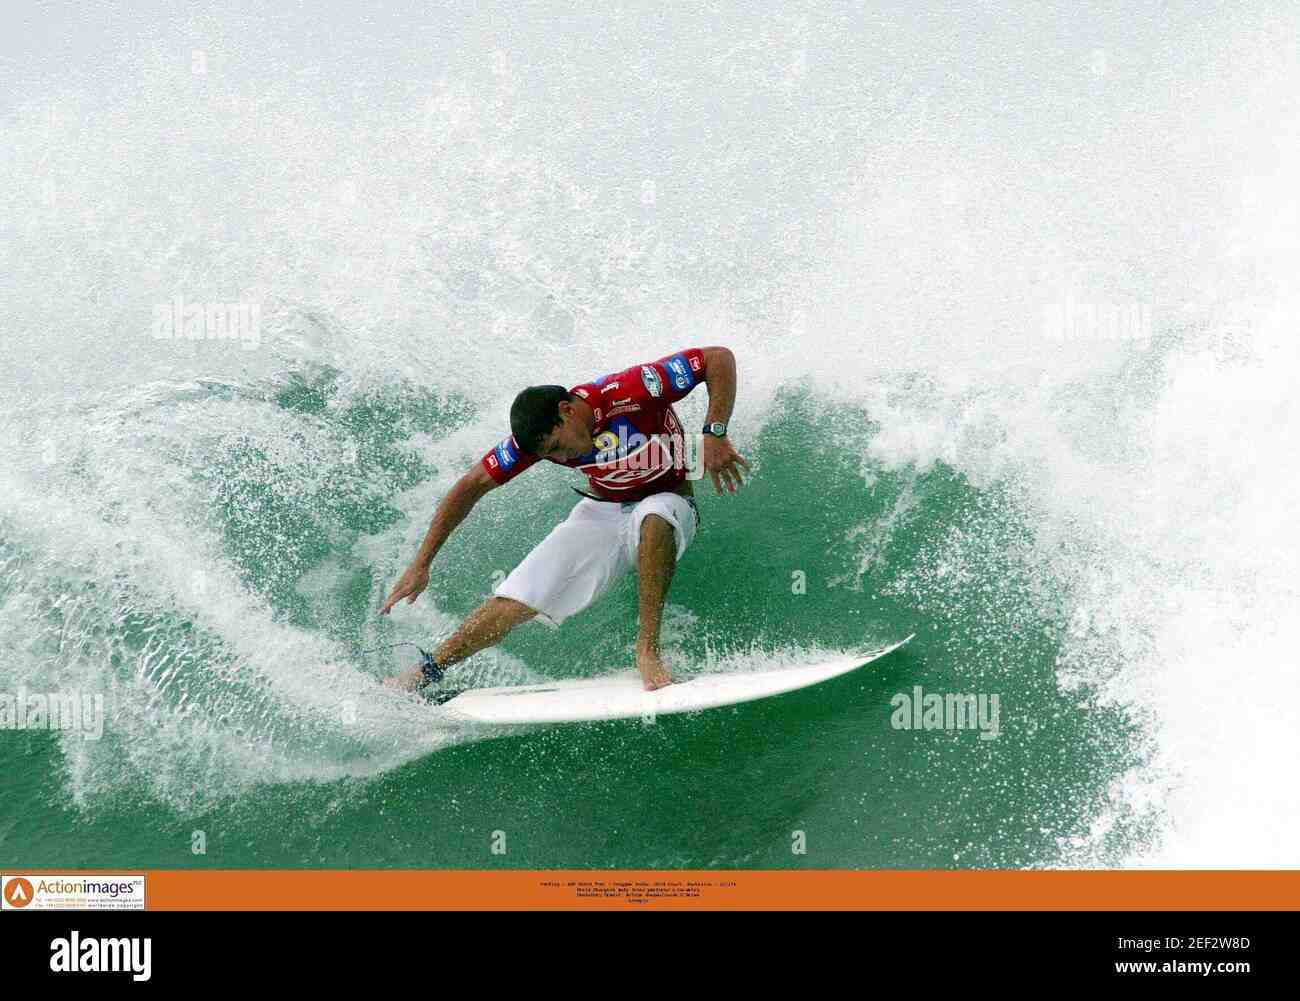 Where did Andy Irons grow up surfing?